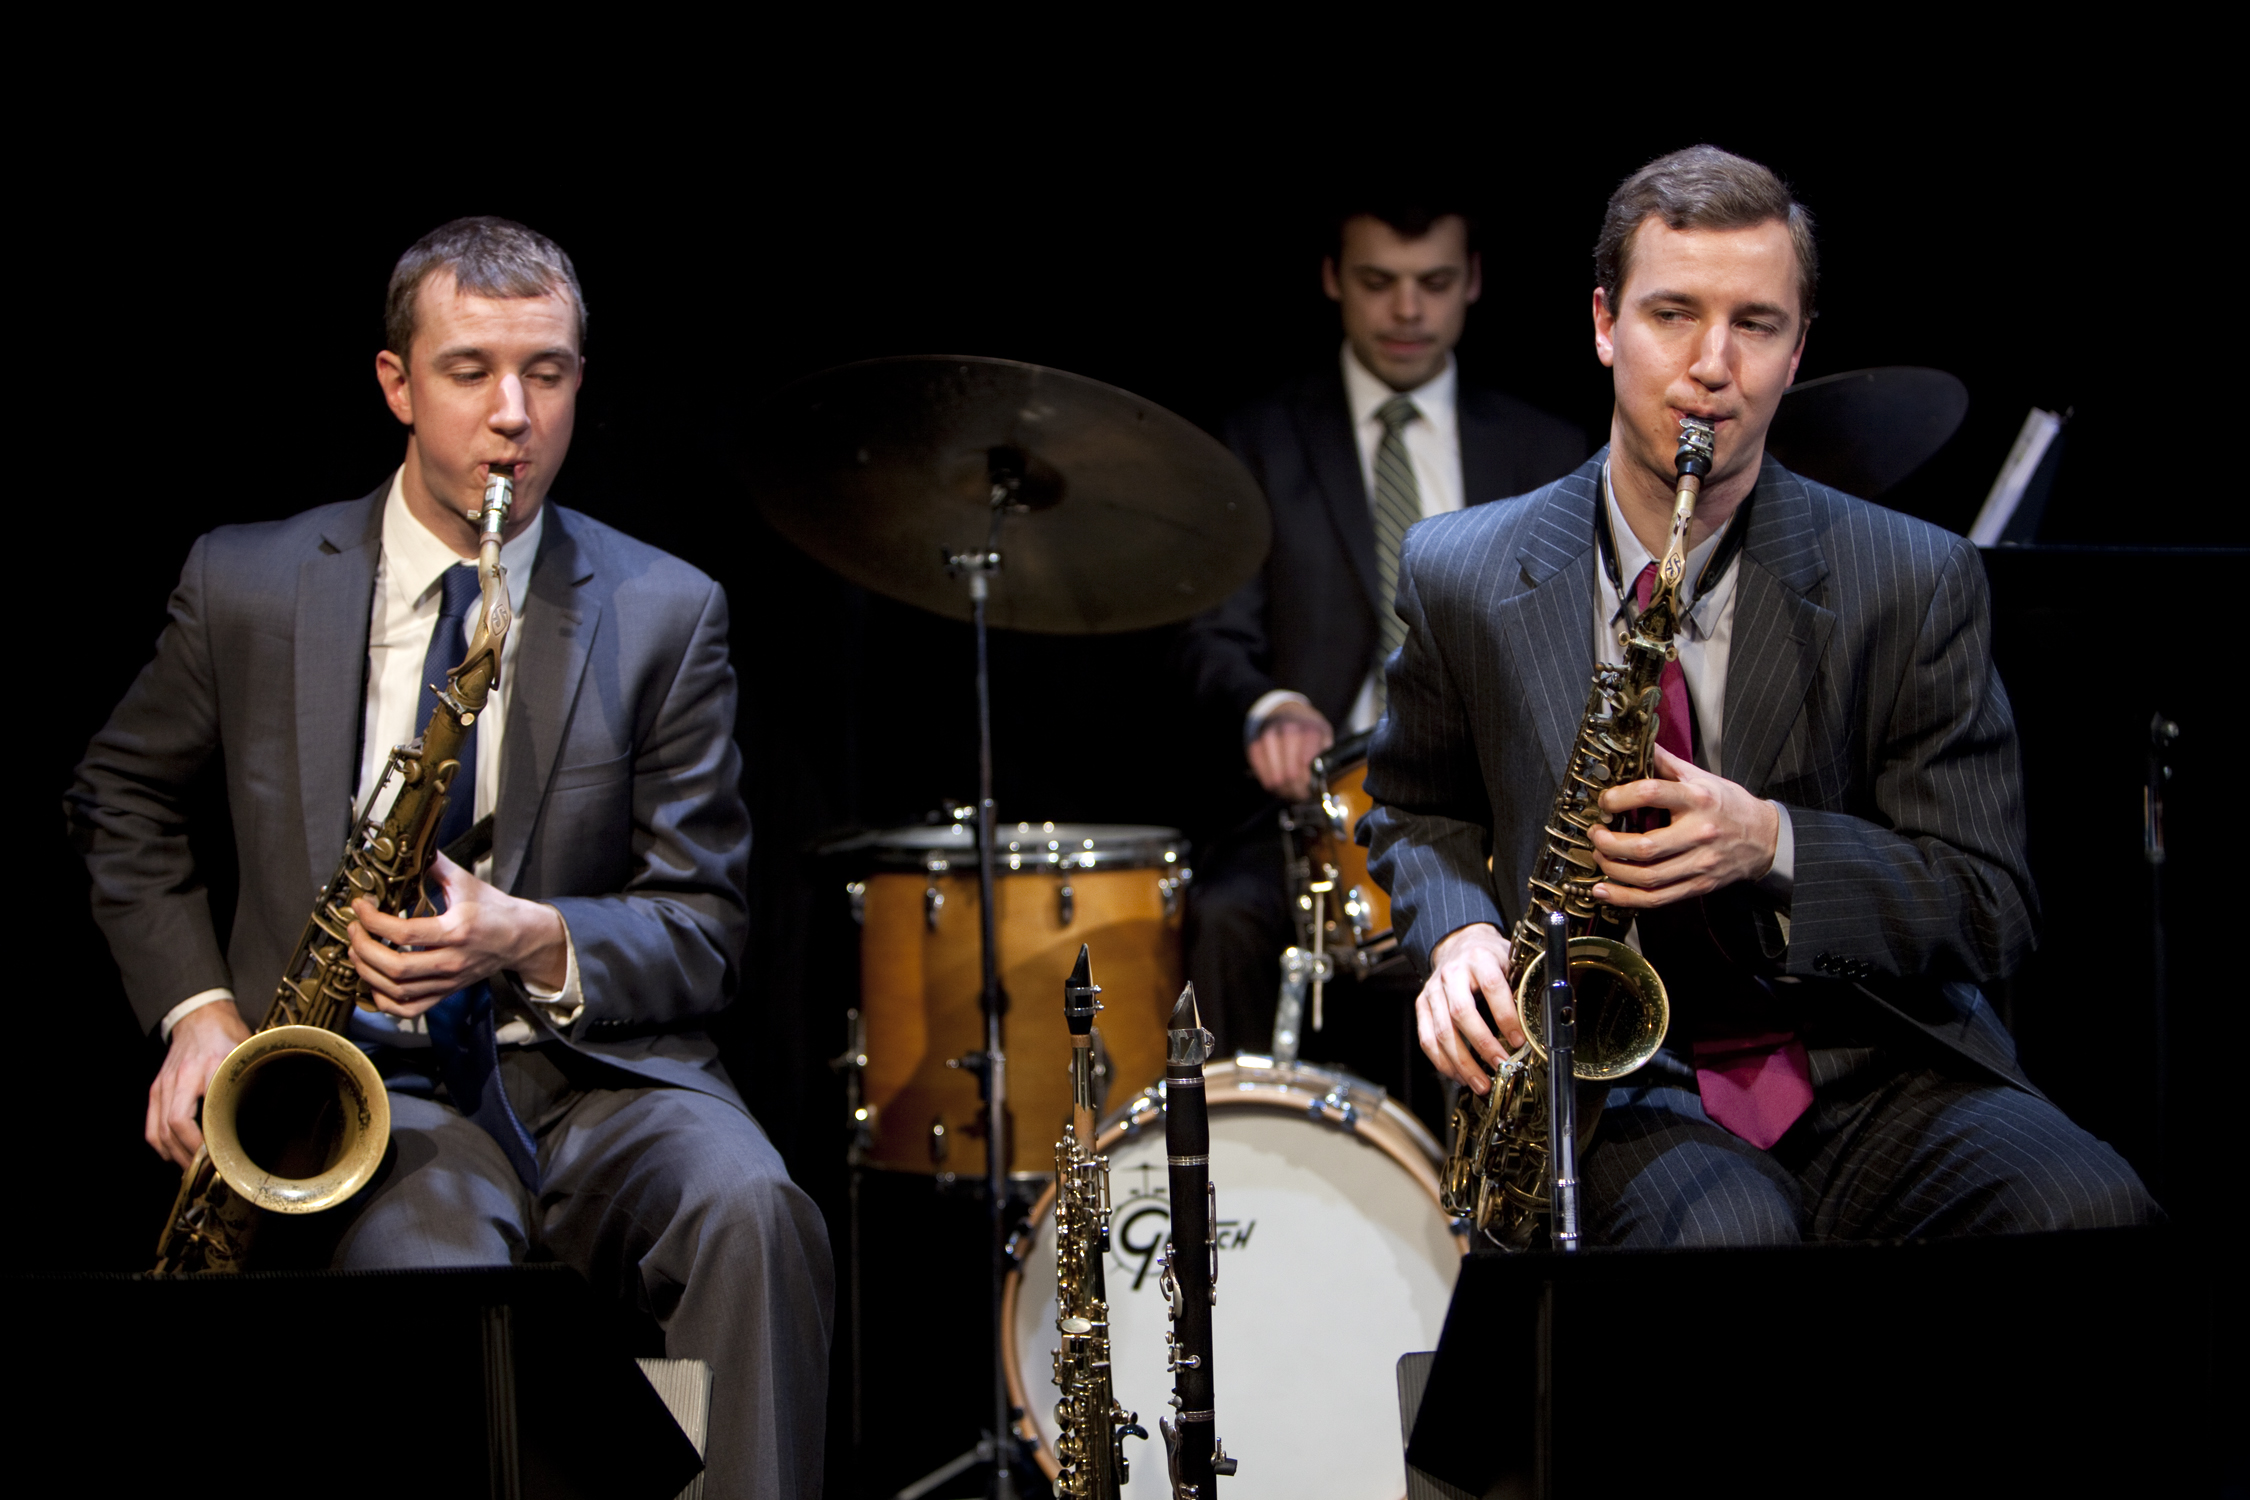  Peter Anderson, Luc Decker (drums), and Will Anderson in LE JAZZ HOT HOW THE FRENCH SAVED JAZZ at 59E59 Theaters.  Photo credit: Eileen O'Donnell